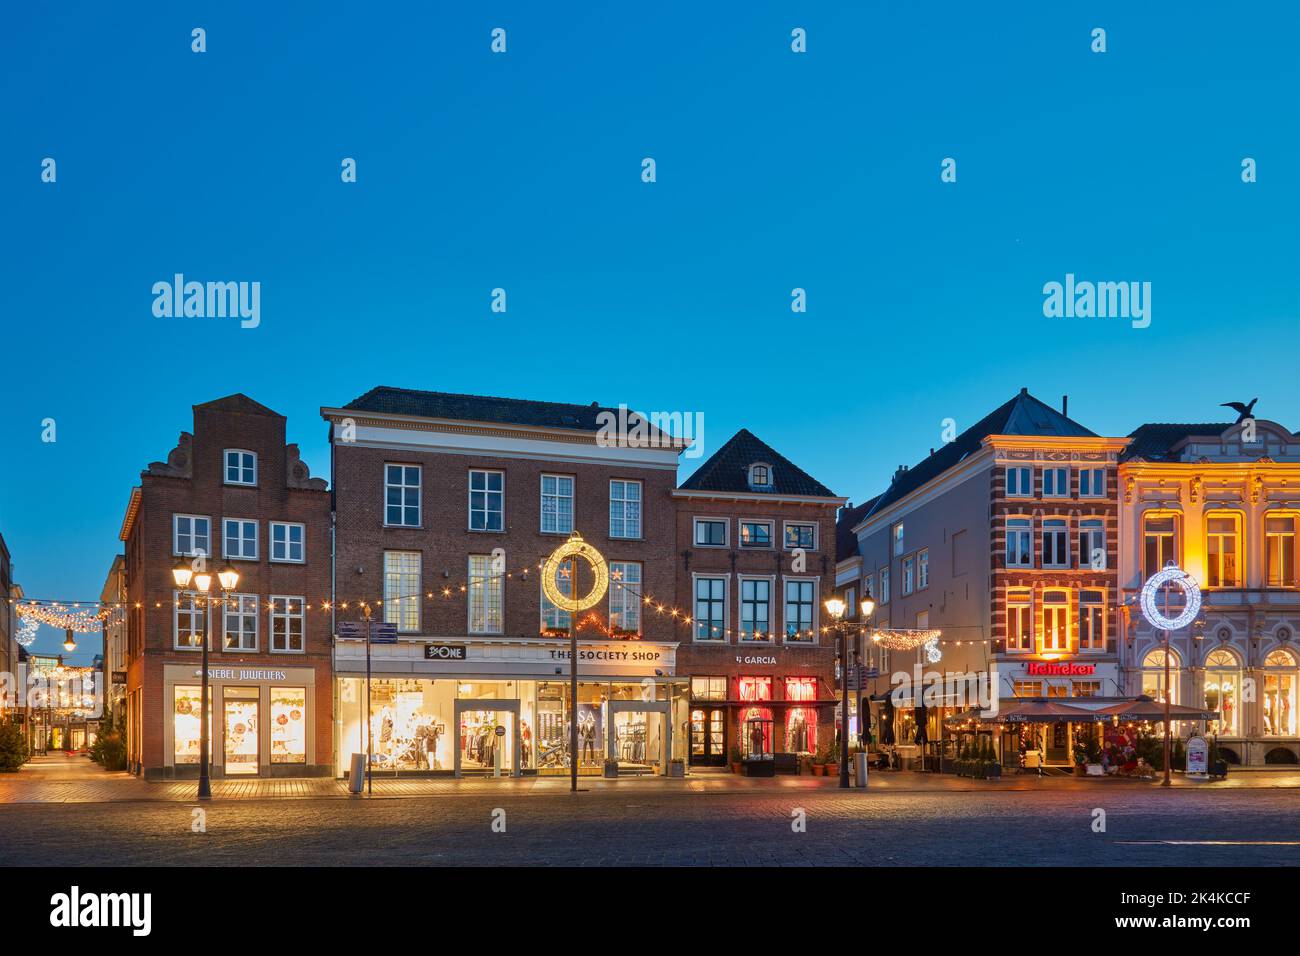 Den bosch, The Netherlands - December 21, 2021: Retail stores and pub on the central square 'Markt' in the city center of Den Bosch, The Netherlands Stock Photo